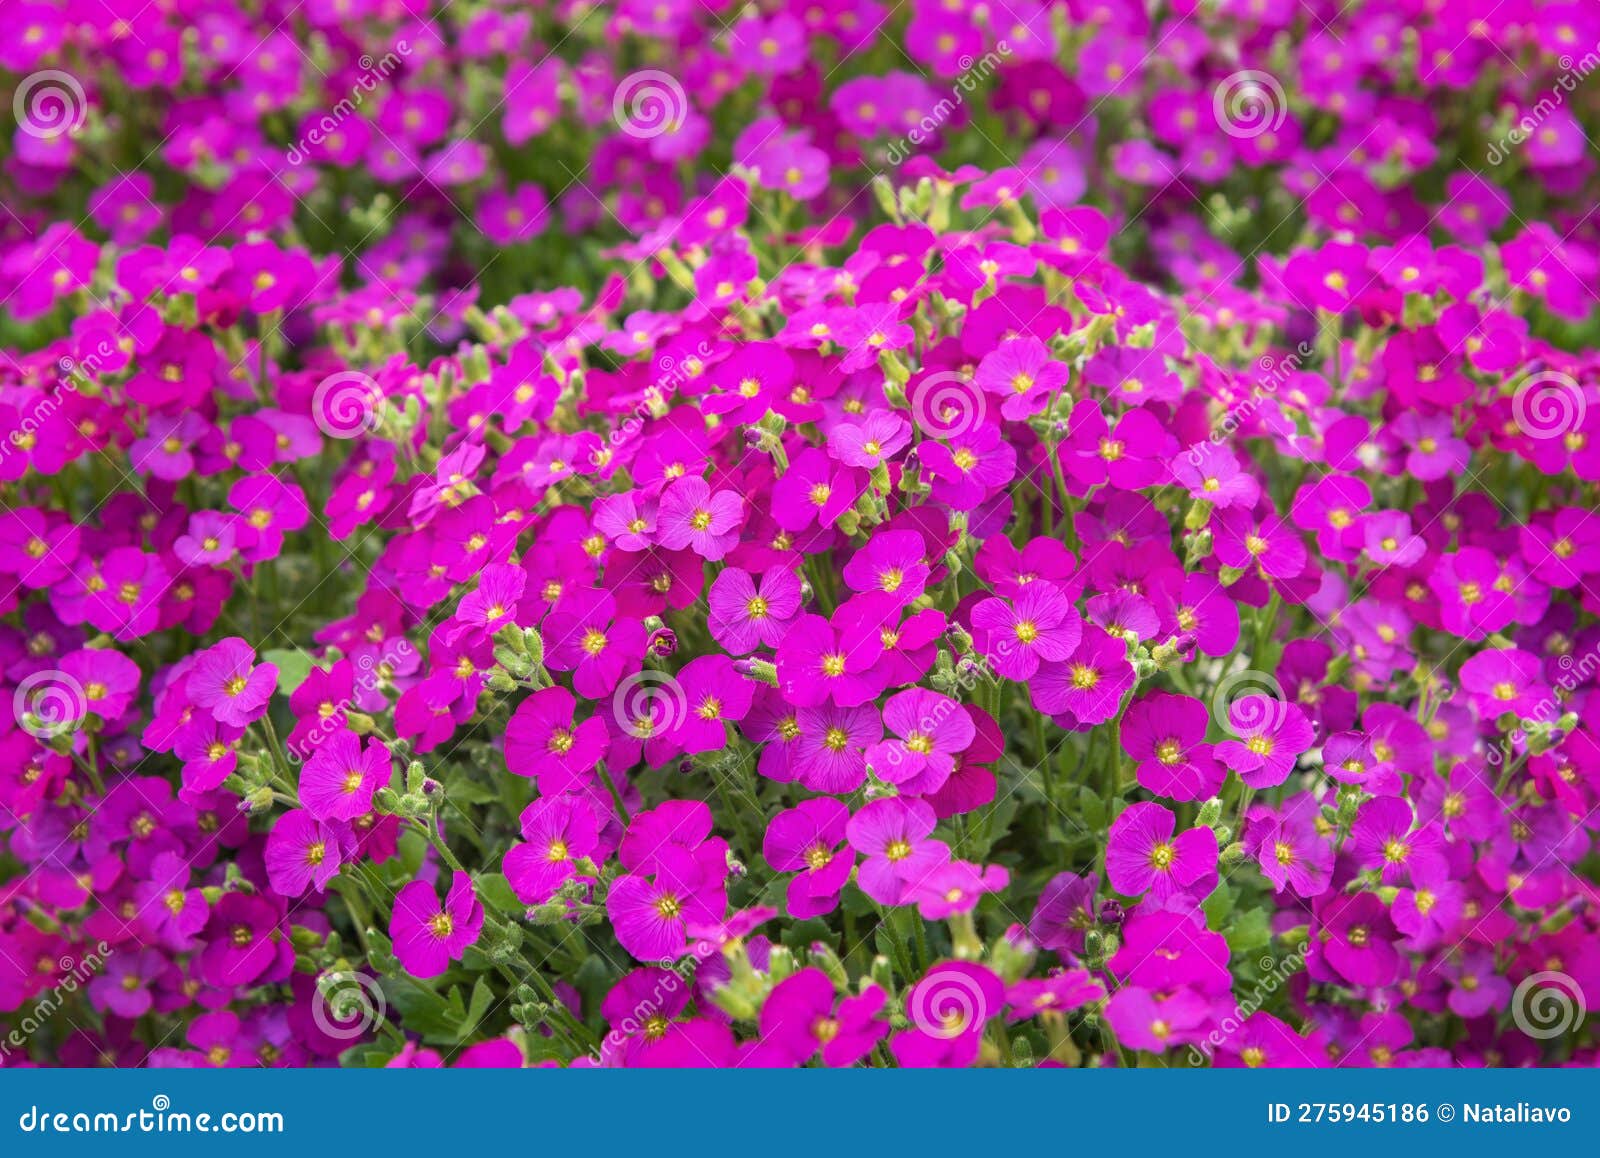 aubrieta florado rose red, a perennial with pink, wheel-d flowers and dark green leaves